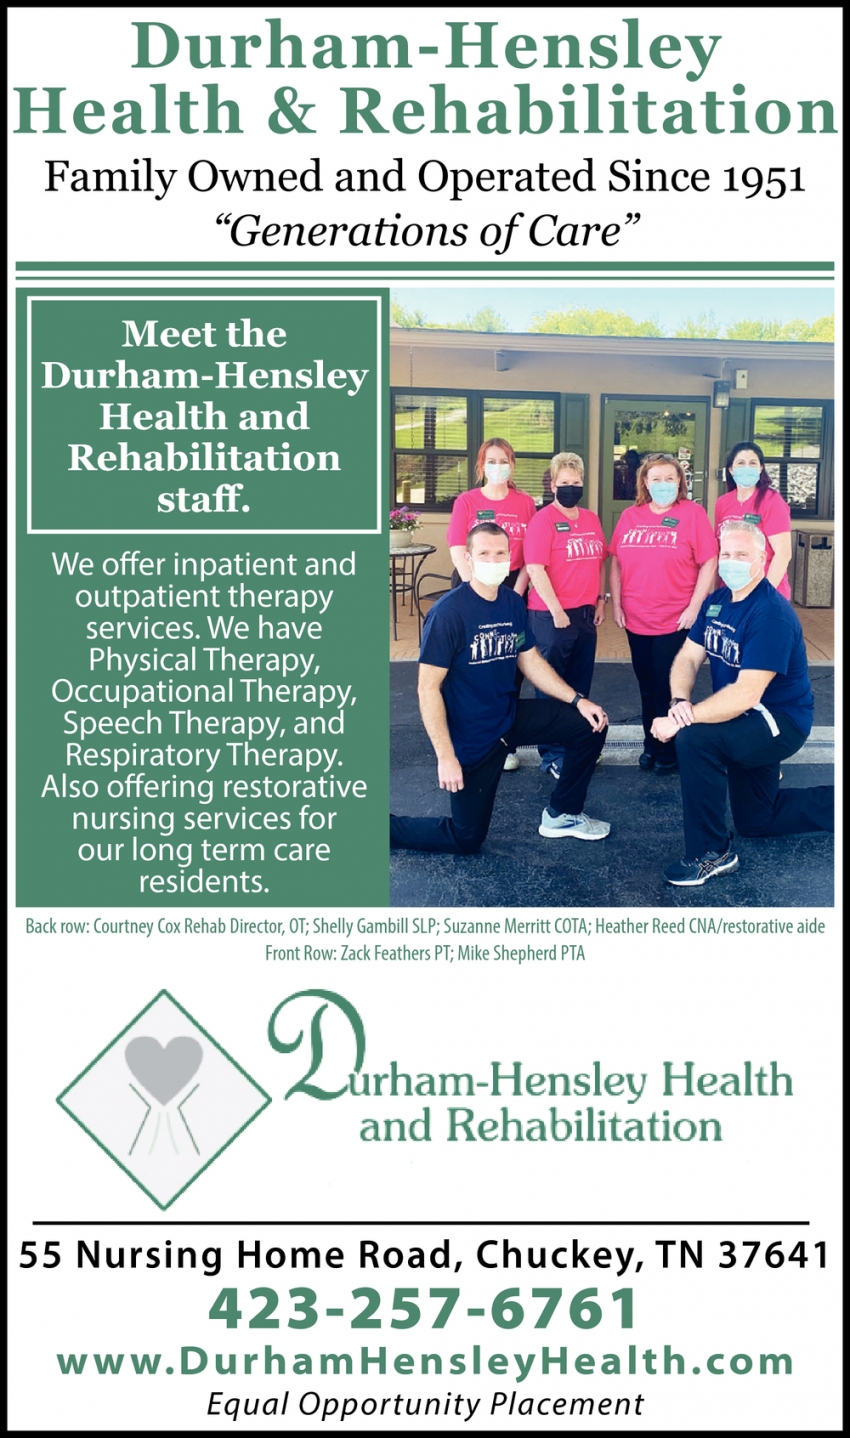 We Offer Inpatient and Outpatient Therapy